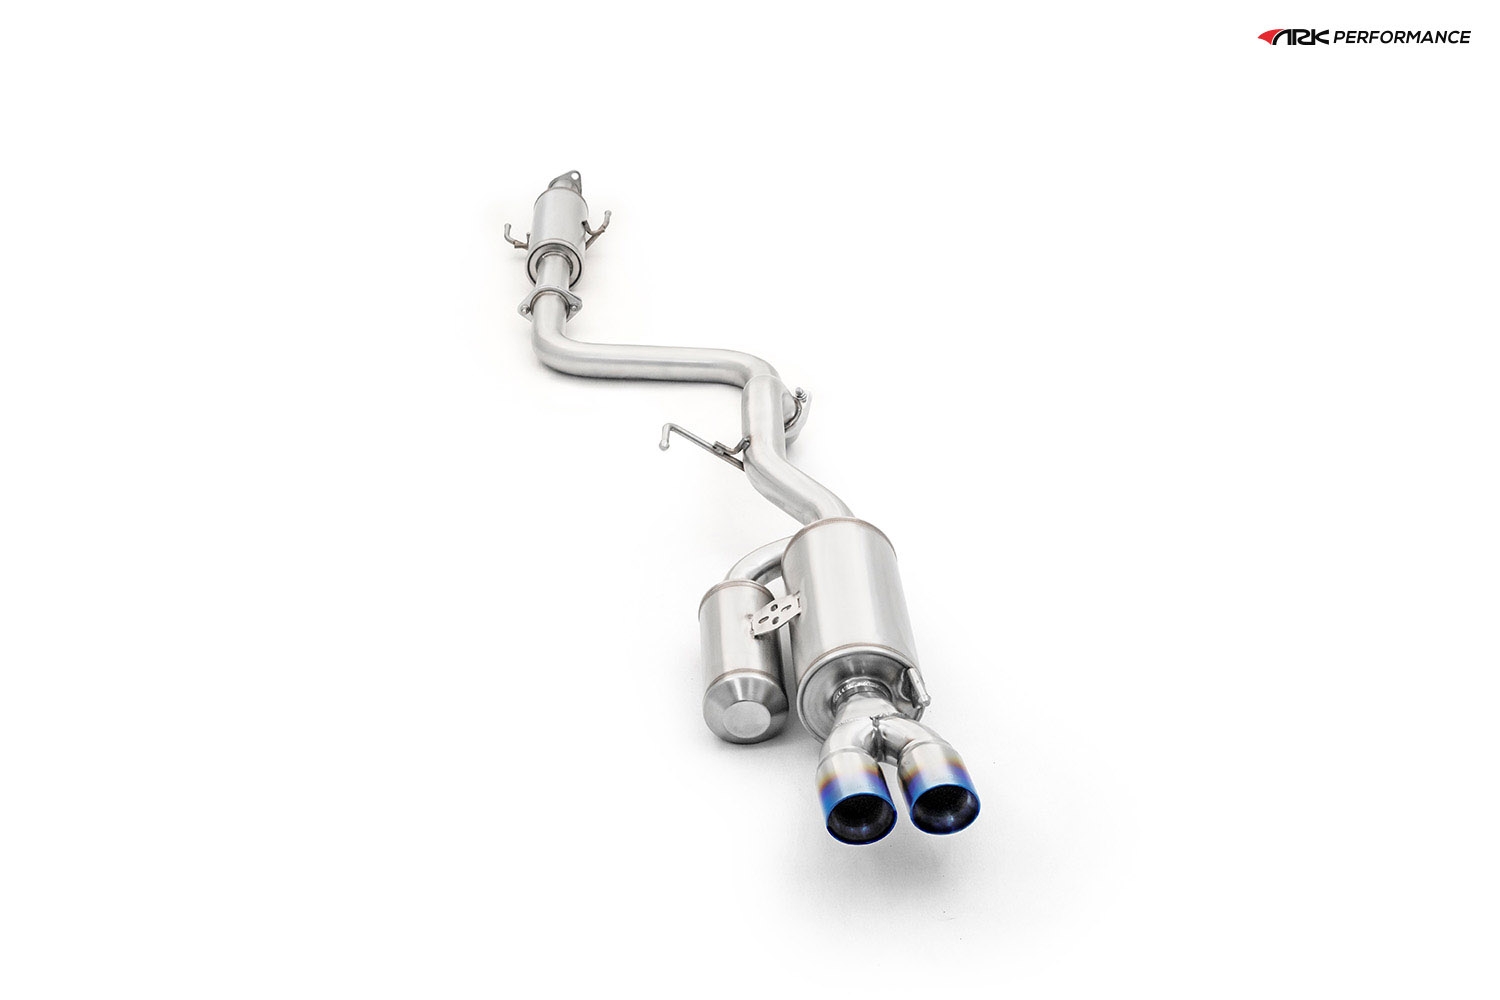 Ark Performance Stainless Steel DT-S Cat-Back Exhaust System 2.5in Pipe w/ 3.0 Burnt Dual Tip, Single Exit - Kia Forte Koup 10-13 2.0L I4, 2.4L I4